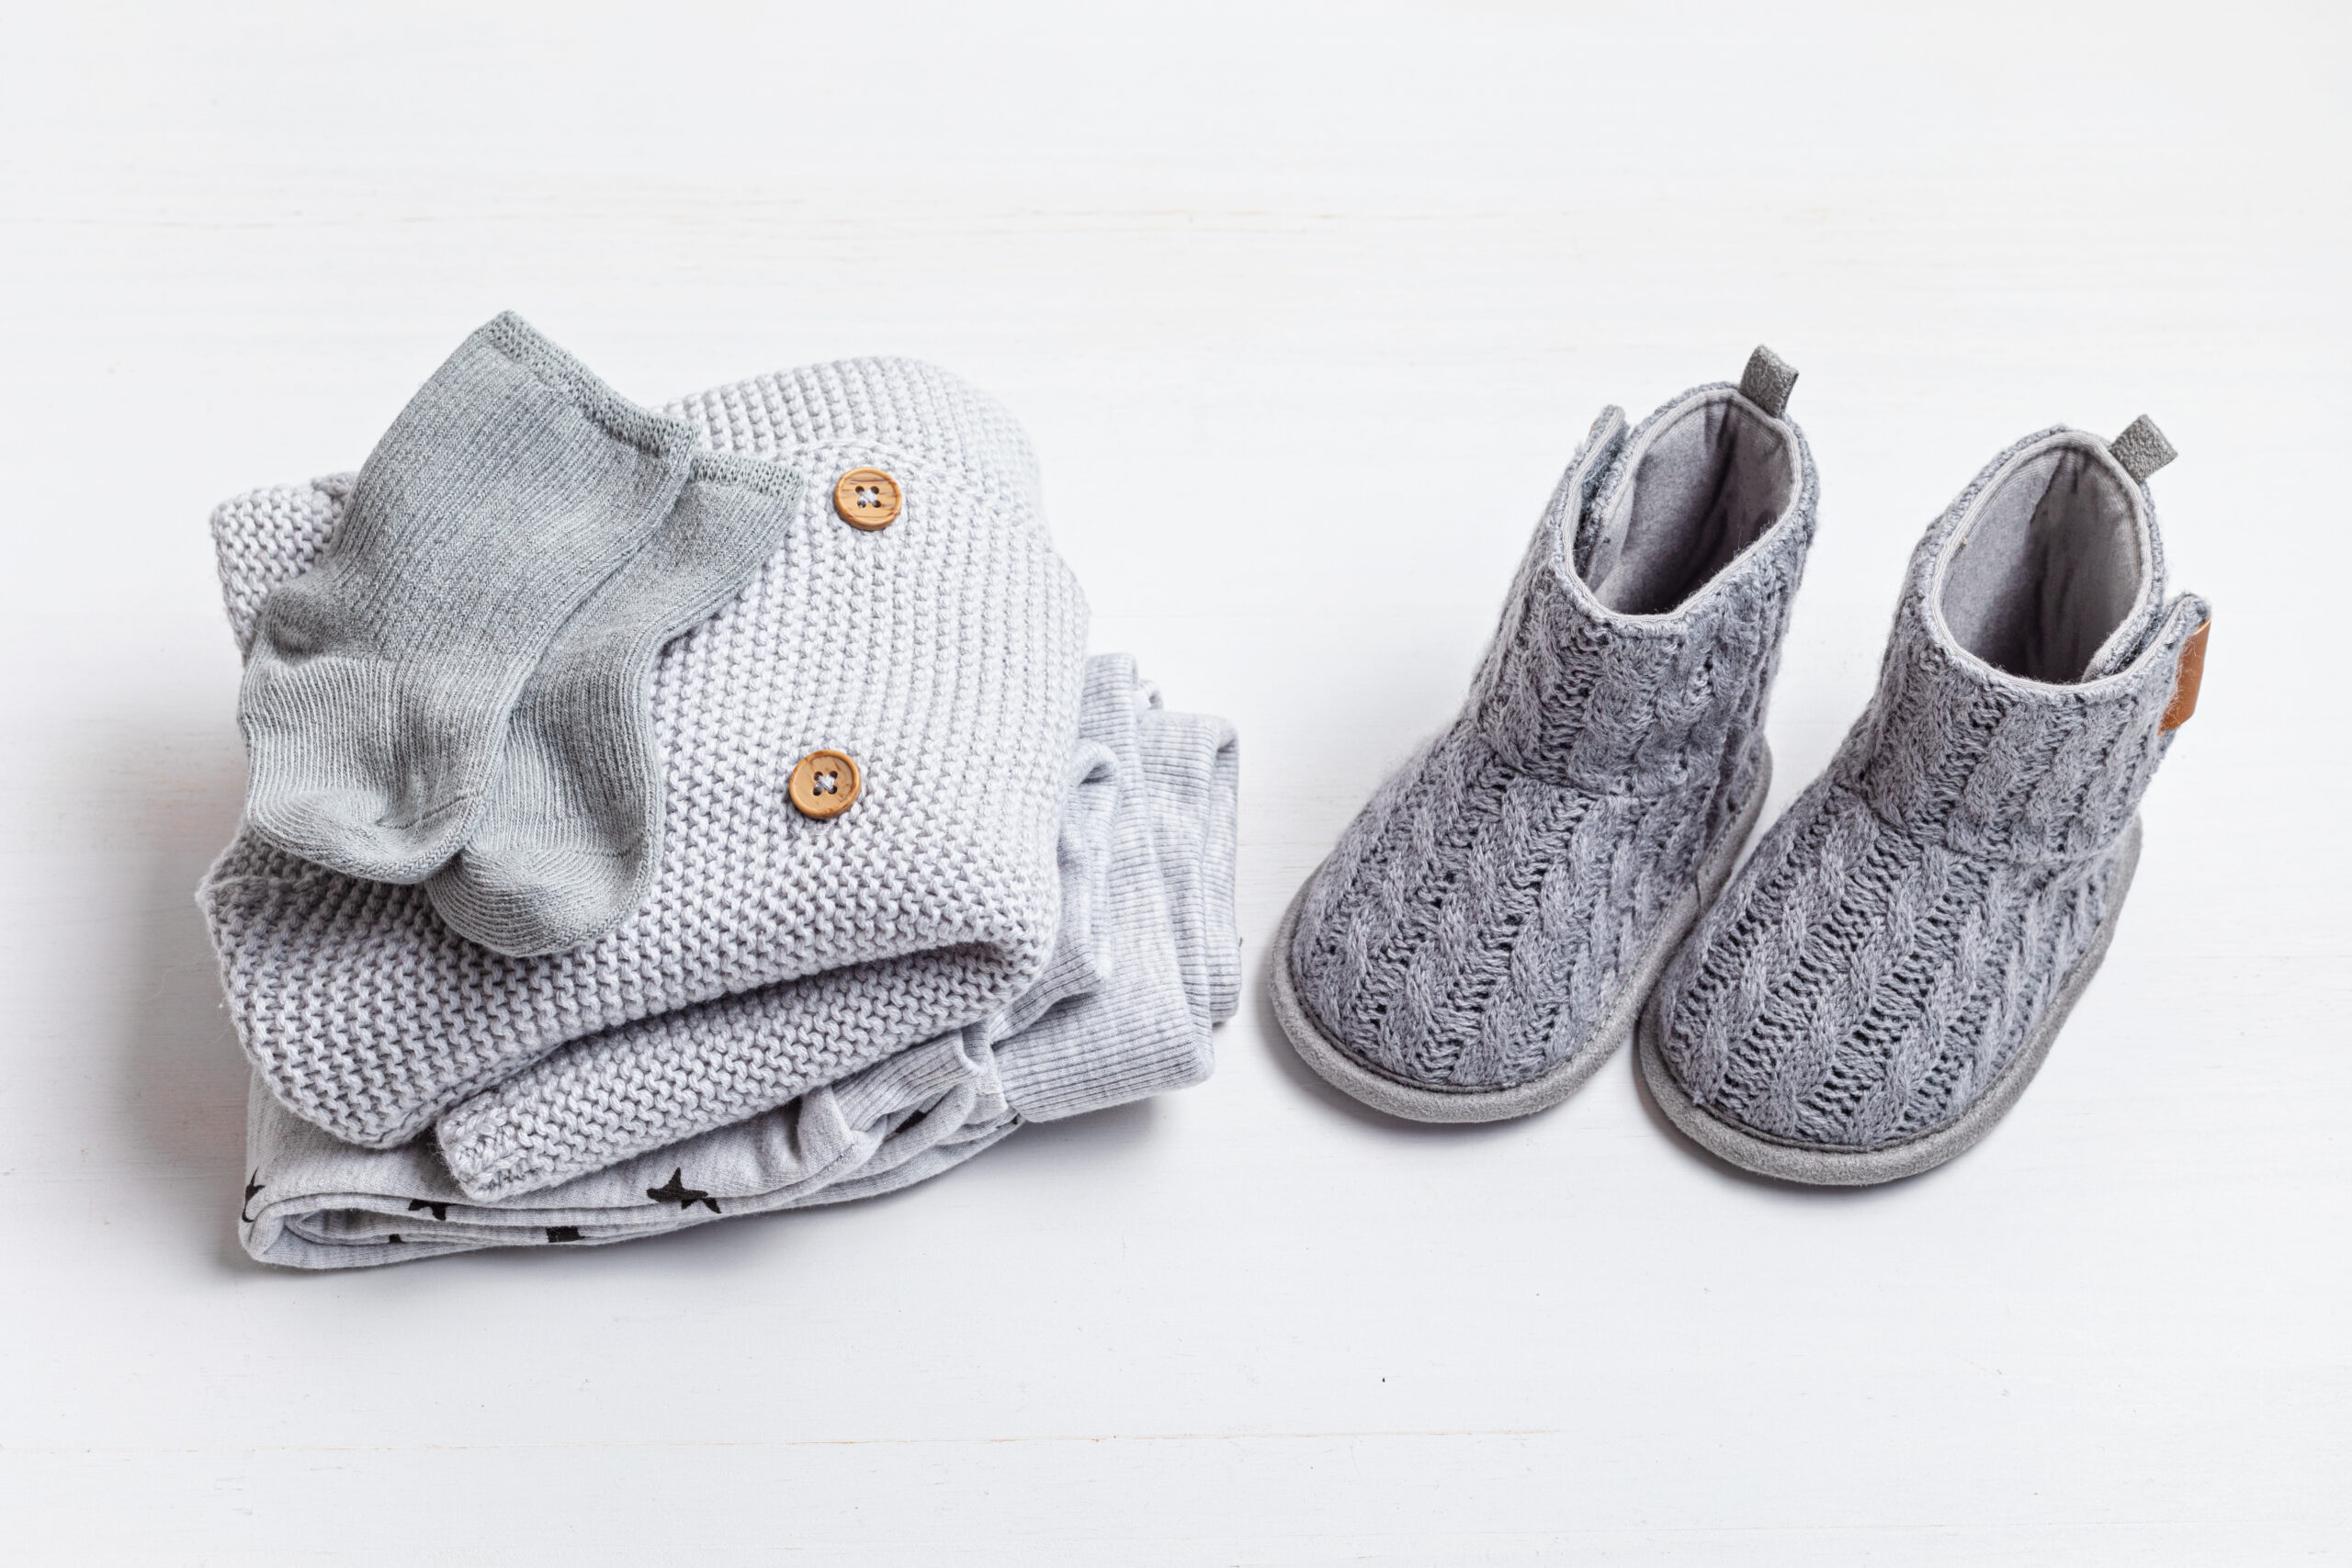 Collection of cute organic  baby clothes and booties. Warm gender neutral outfit for cold weather of fall and winter season. Newborn gifts, baby shower, second hand clothes, donation idea.